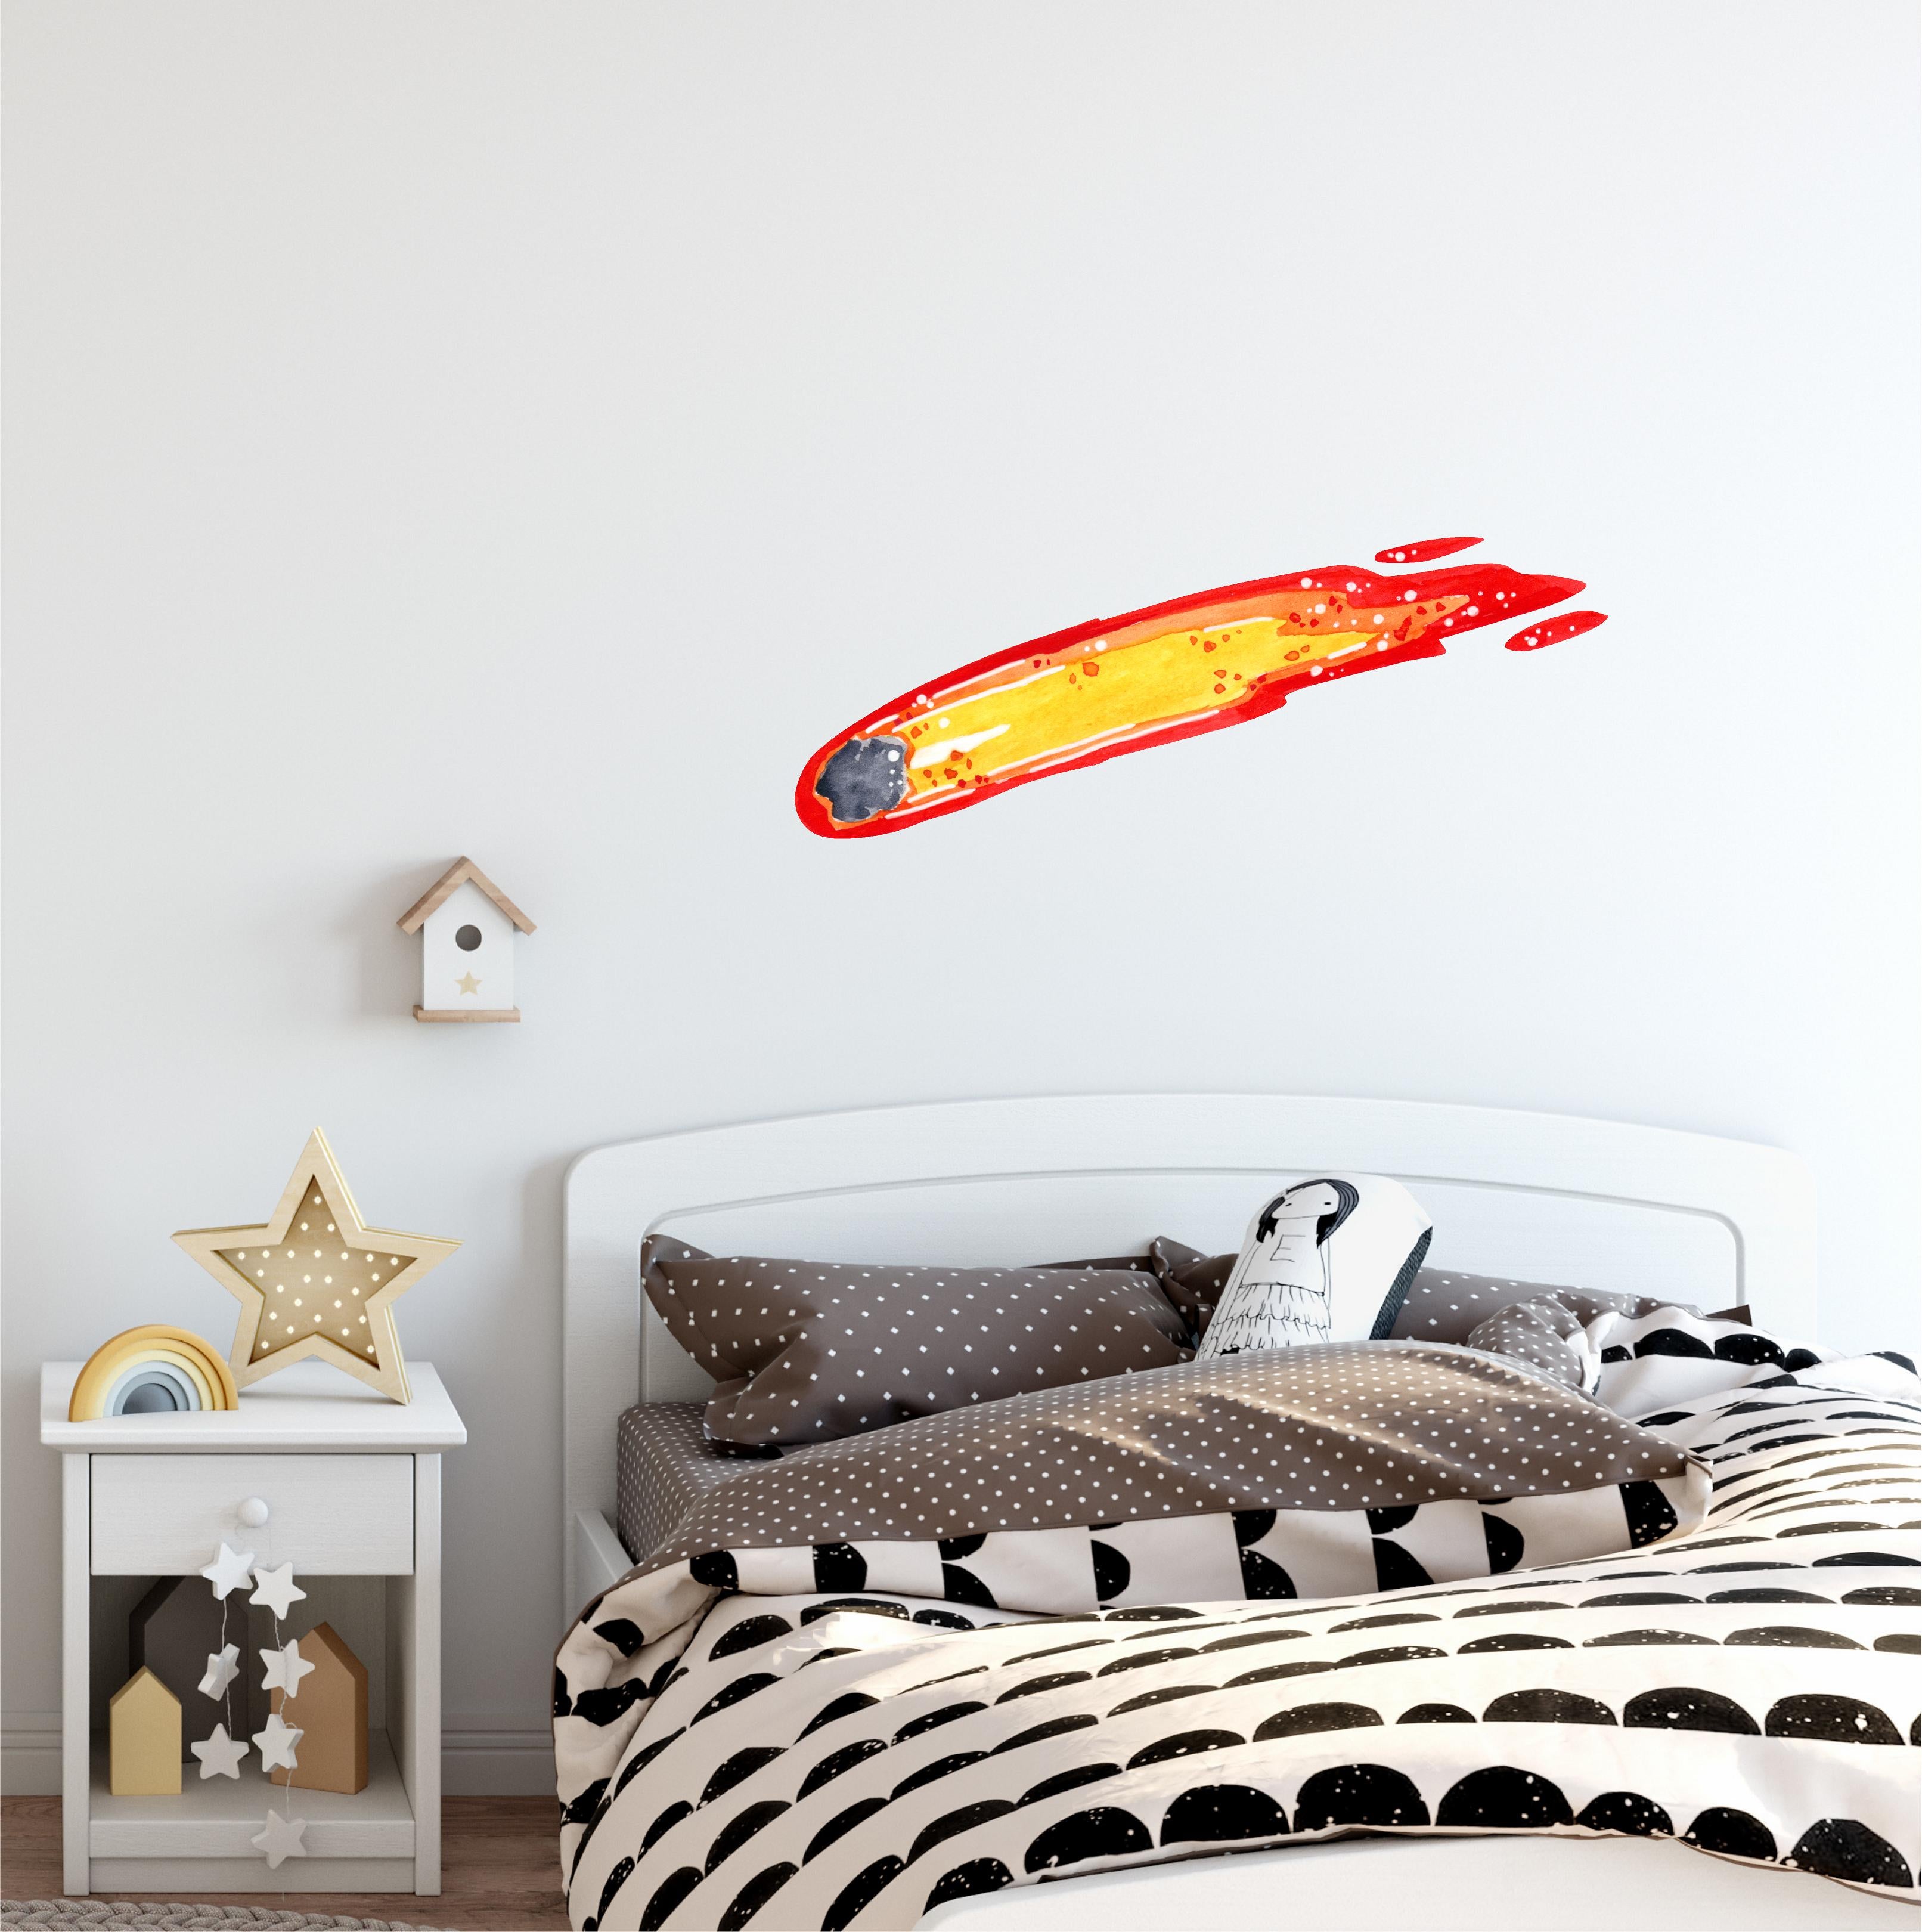 Watercolor Comet Wall Decal Space Theme Wall Sticker Burning Comet Meteor Asteroid Fabric Vinyl Wall Sticker | DecalBaby